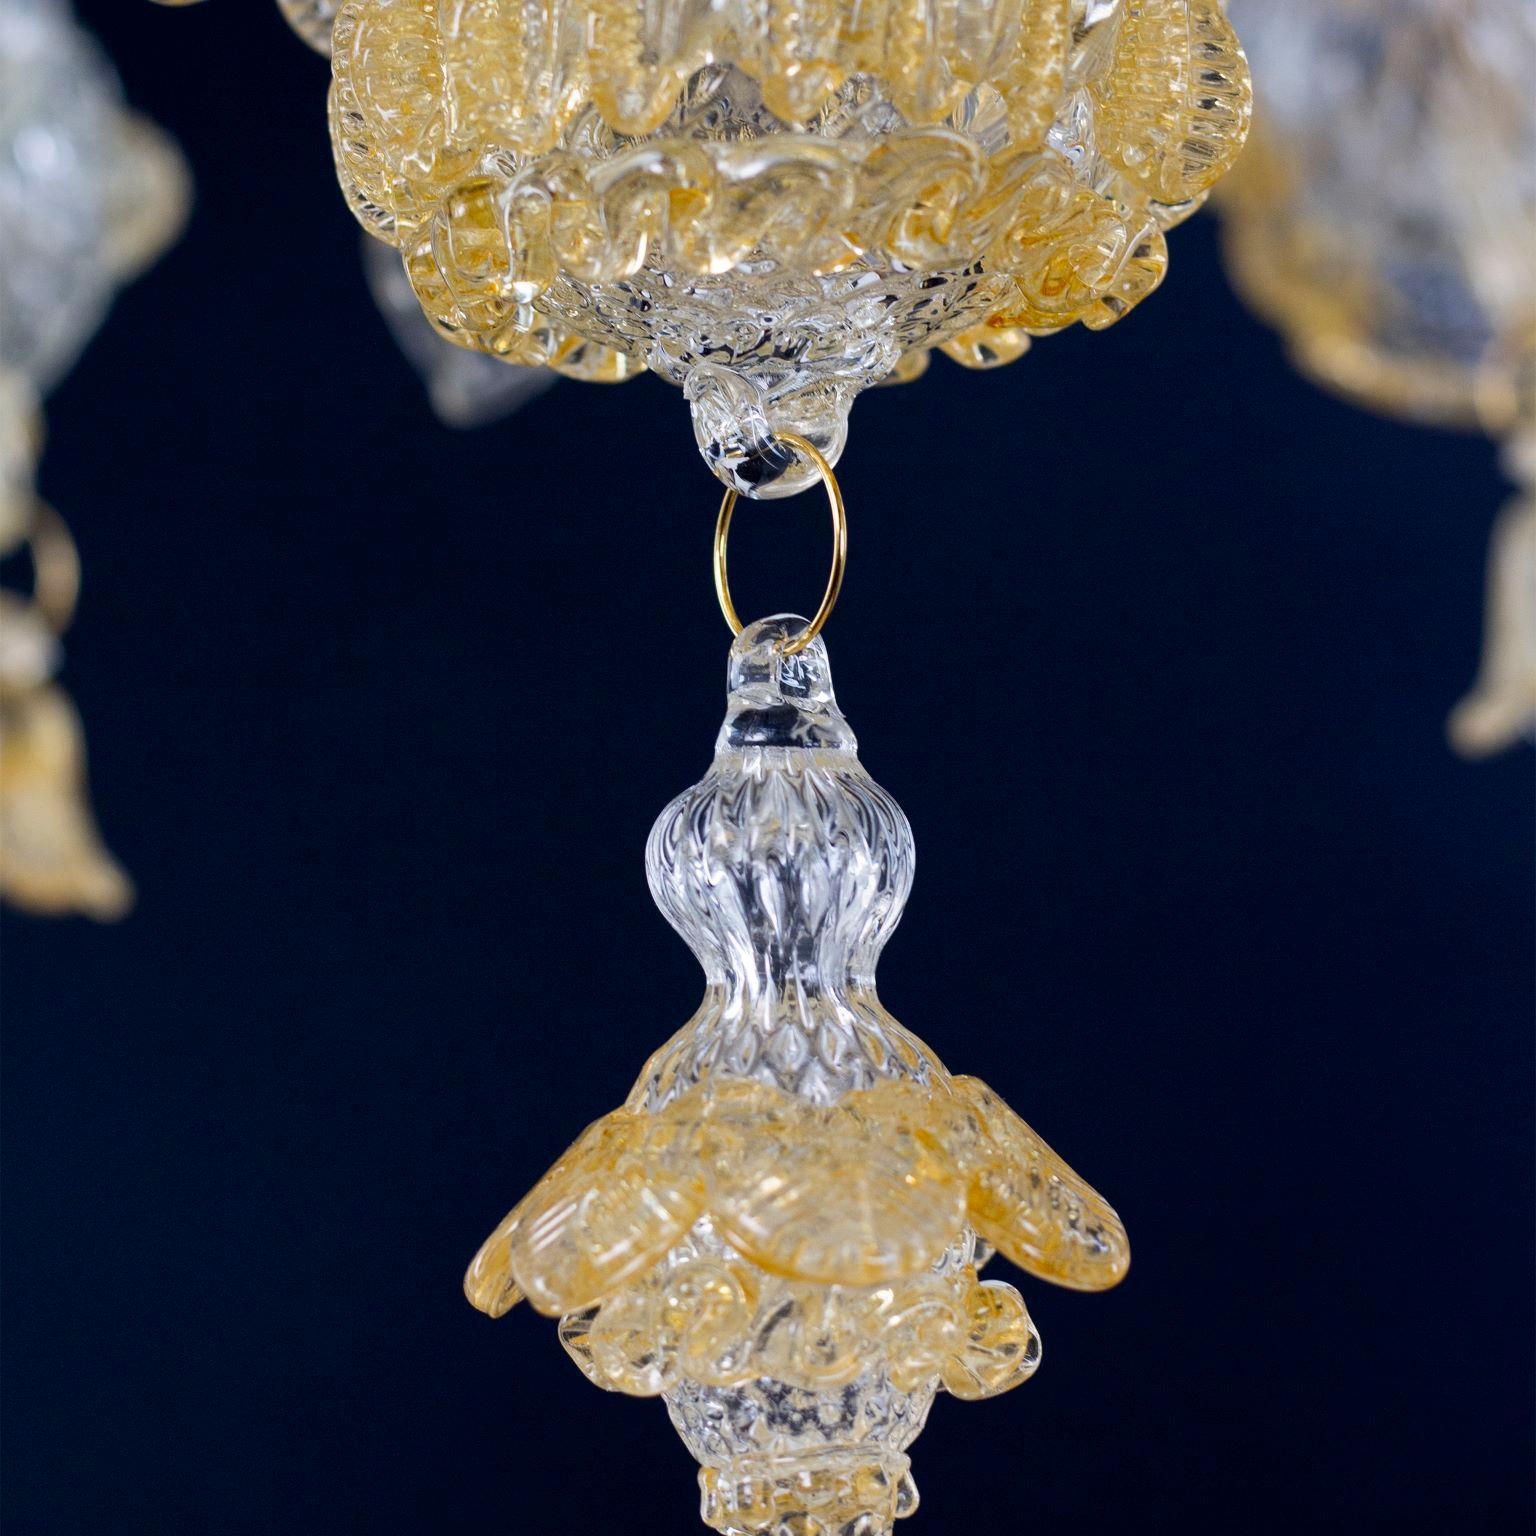 Italian Rezzonico Chandelier 6 Arms Murano Crystal, Amber Glass by Multiforme In New Condition For Sale In Trebaseleghe, IT